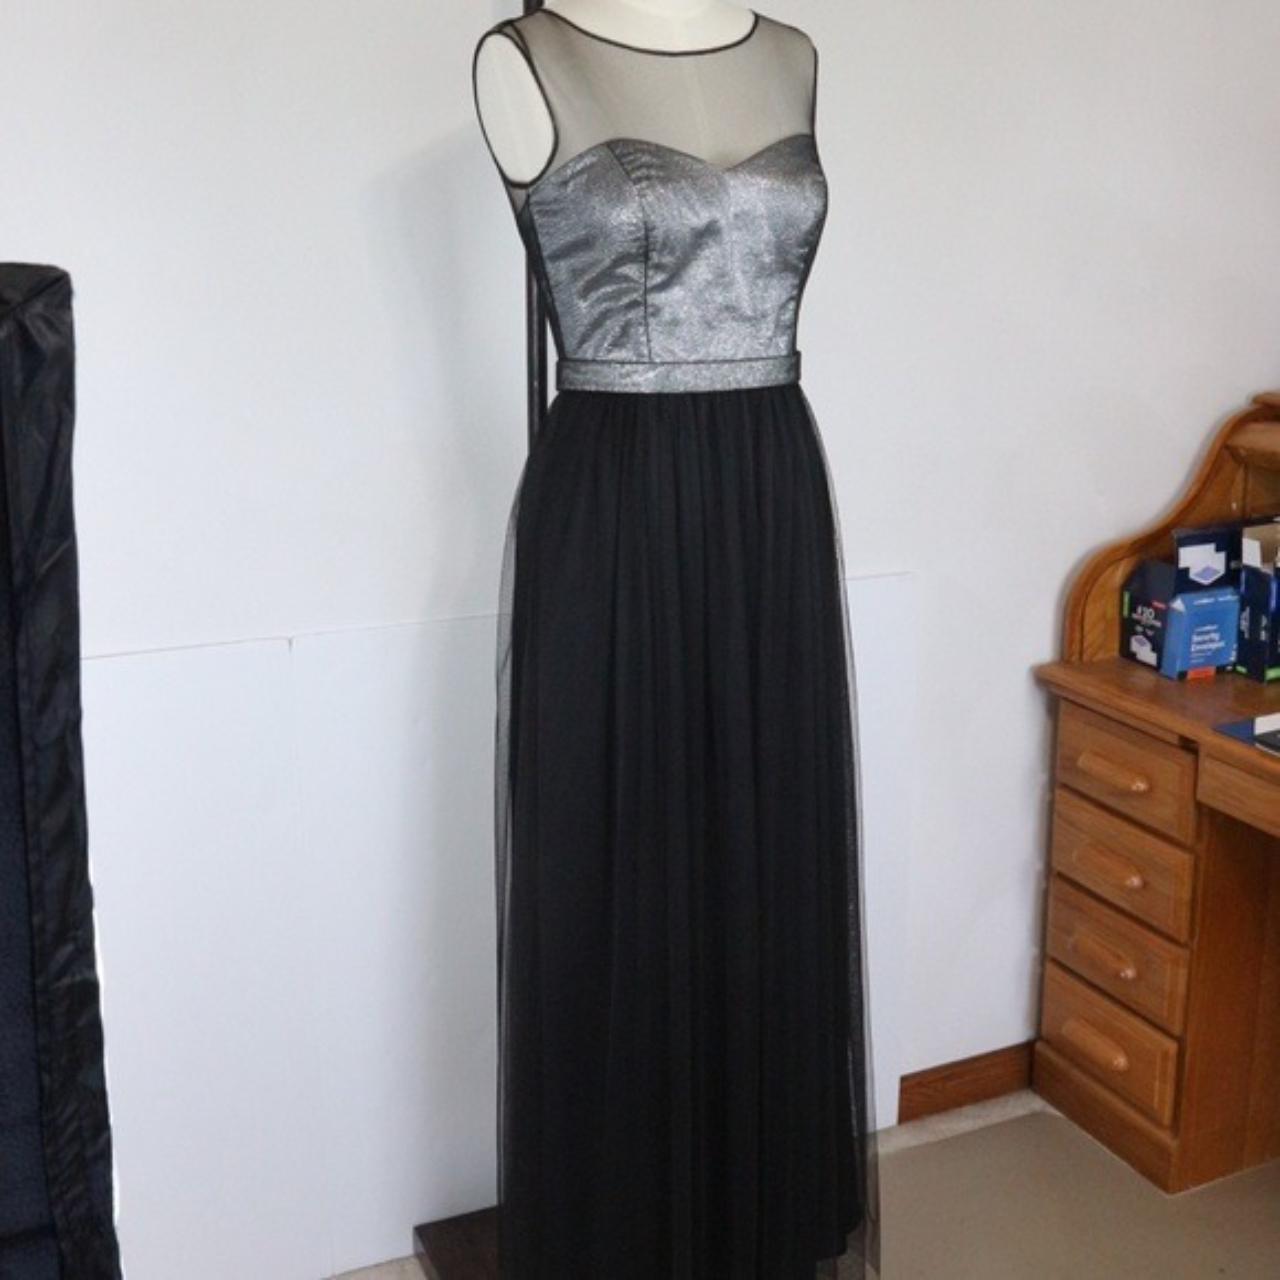 After Six Women's Black and Silver Dress (2)